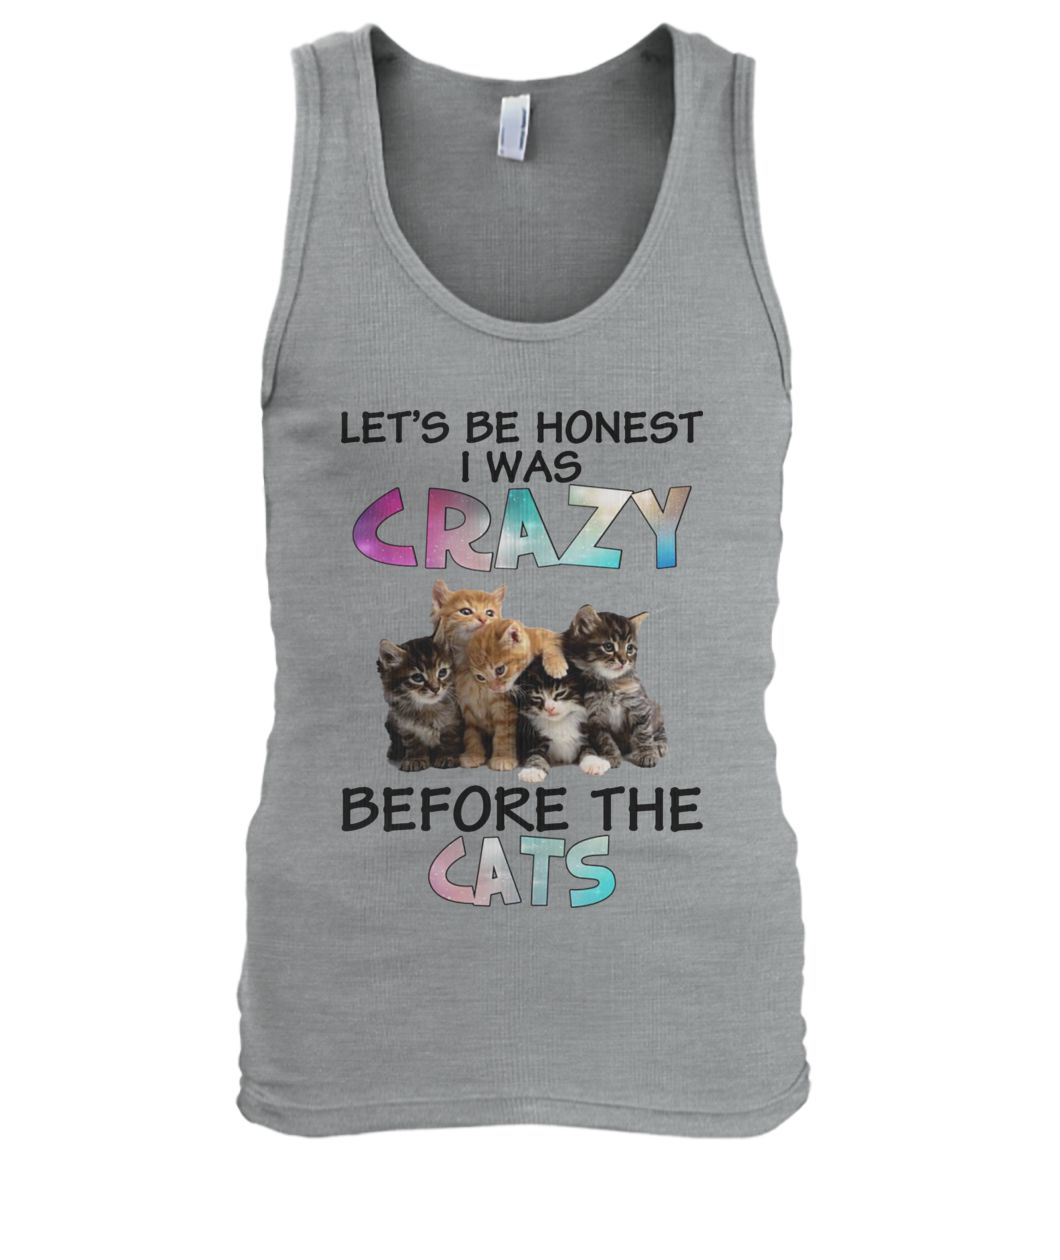 Let's be honest I was crazy before the cats men's tank top